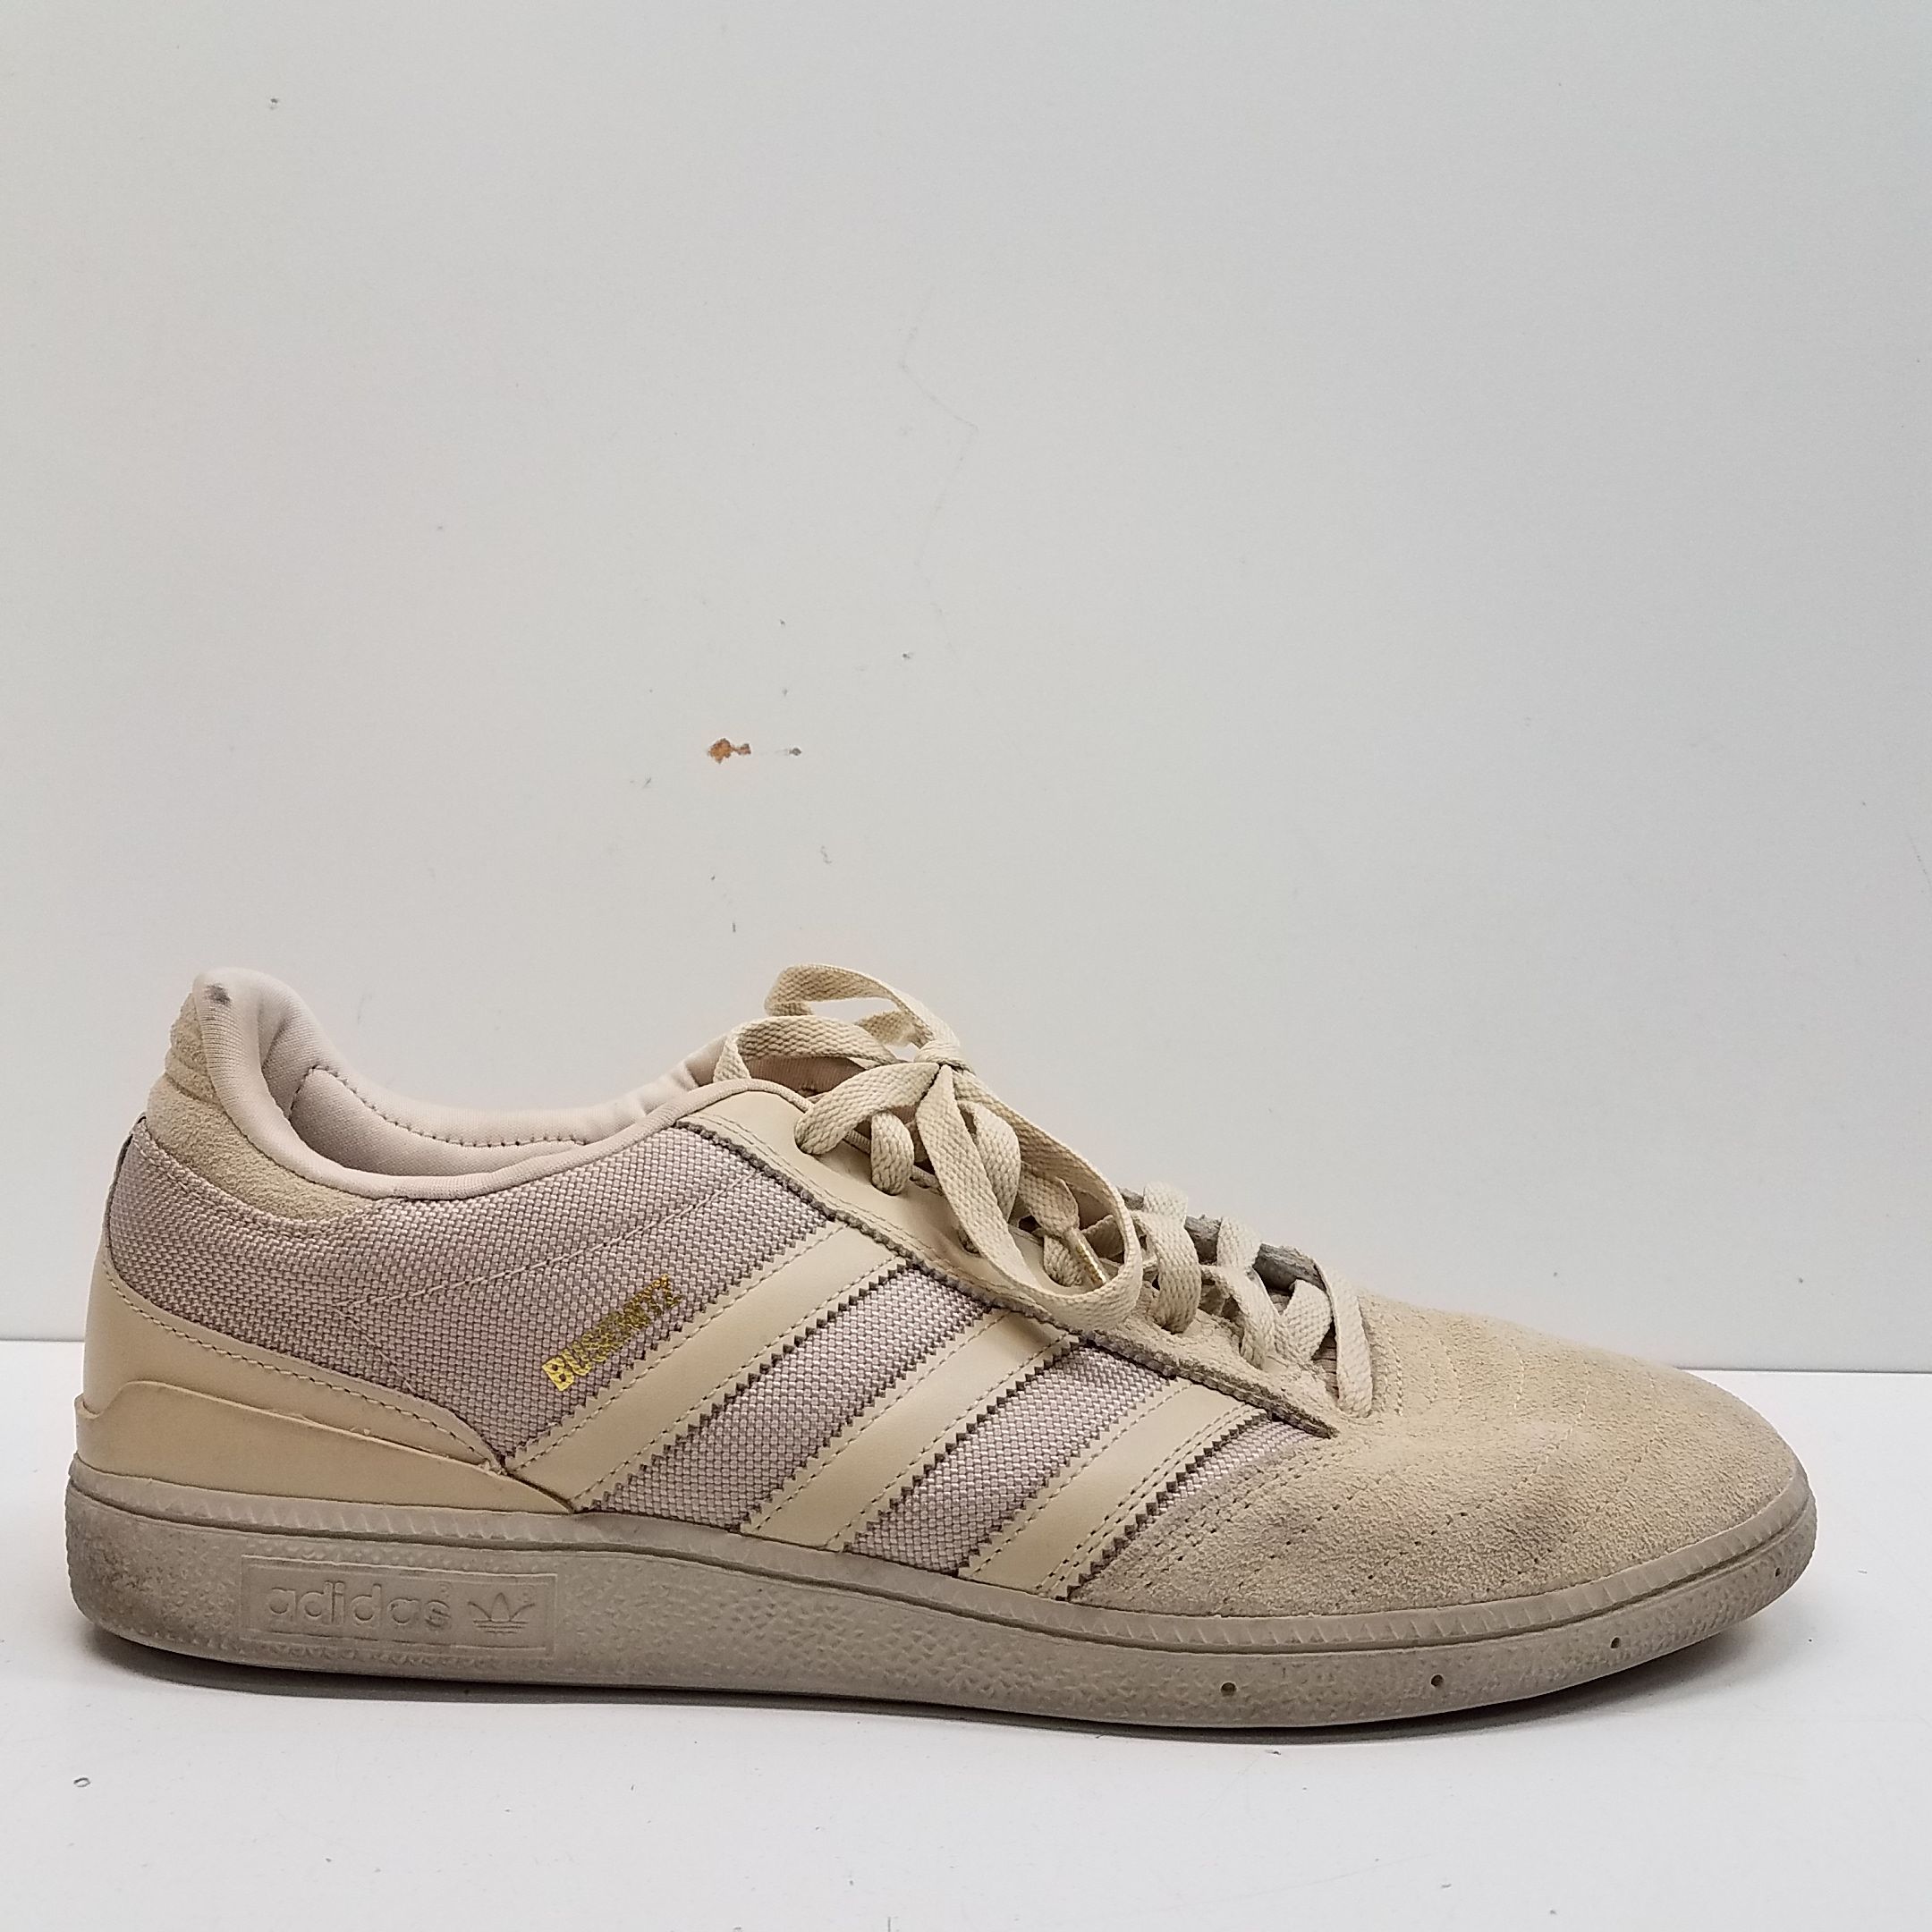 Buy the Adidas x Undefeated Men's Busenitz Dune Gold Shoes Sz. 11 ...